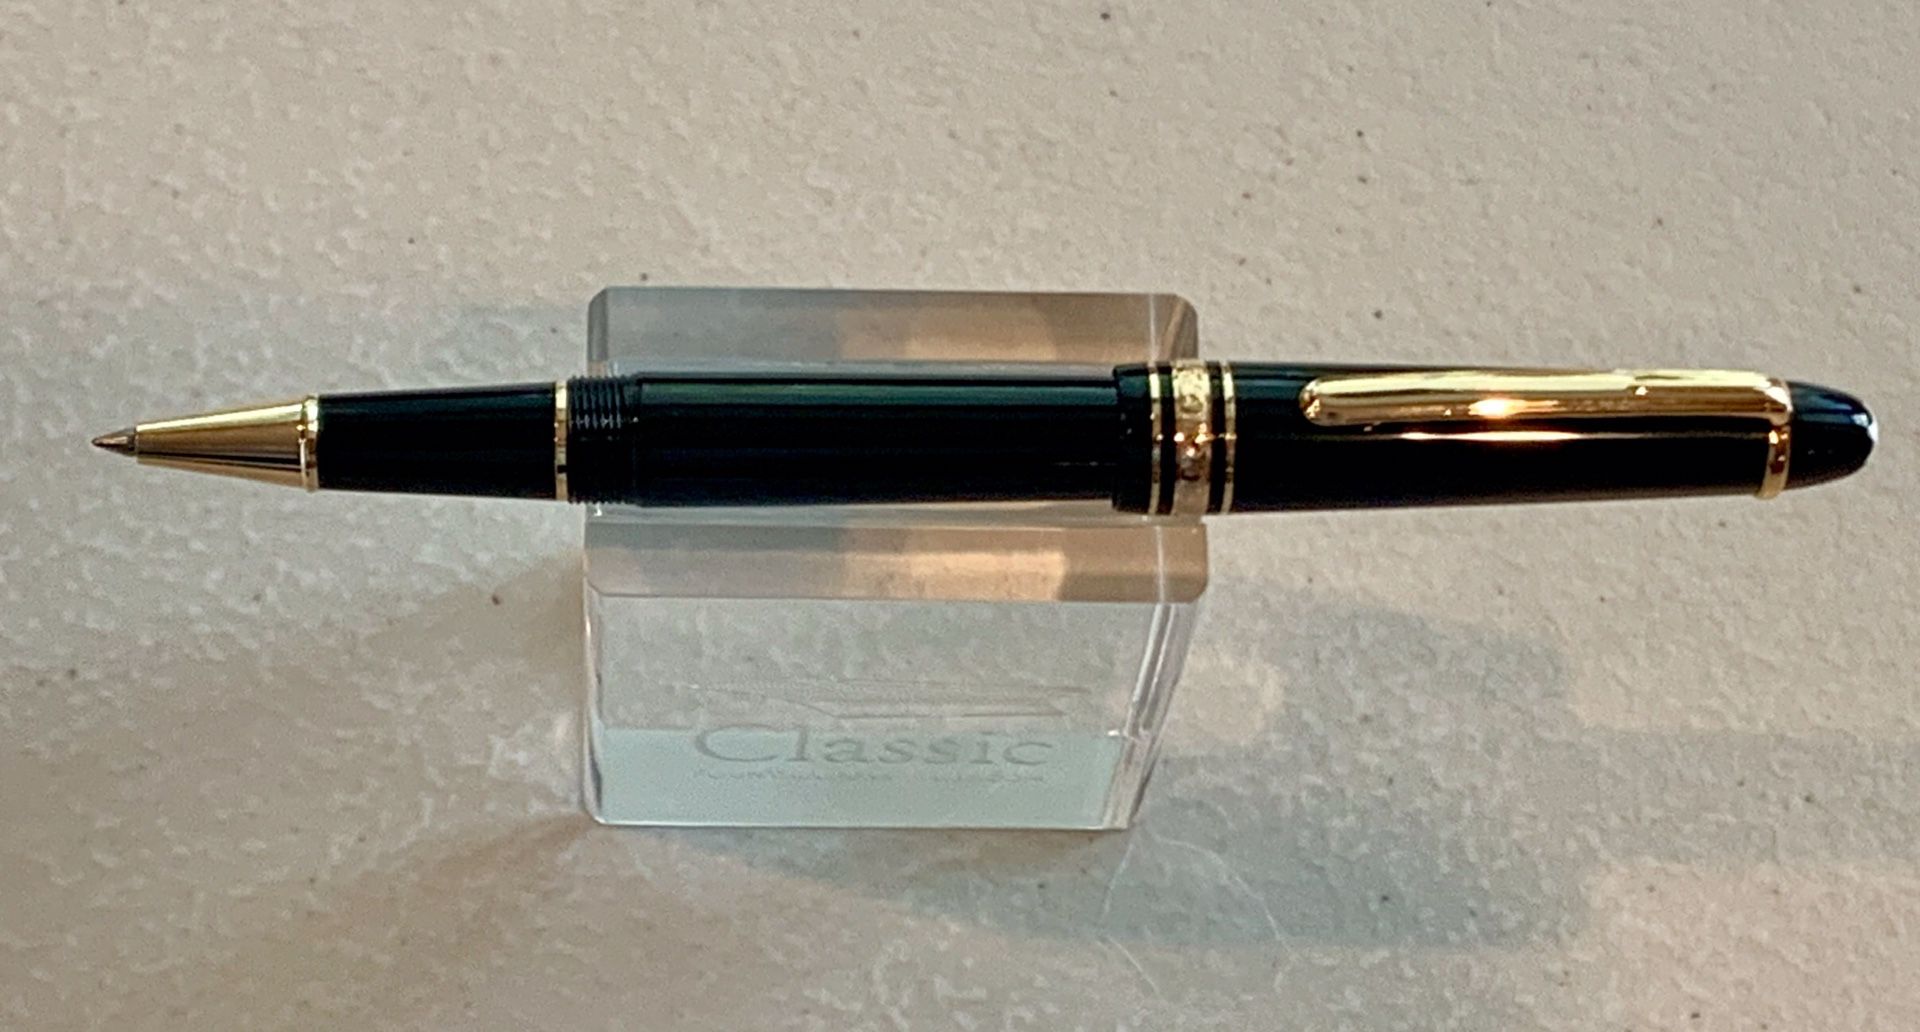 Montblanc 145 Rollerball. From my personal collection. Mint condition